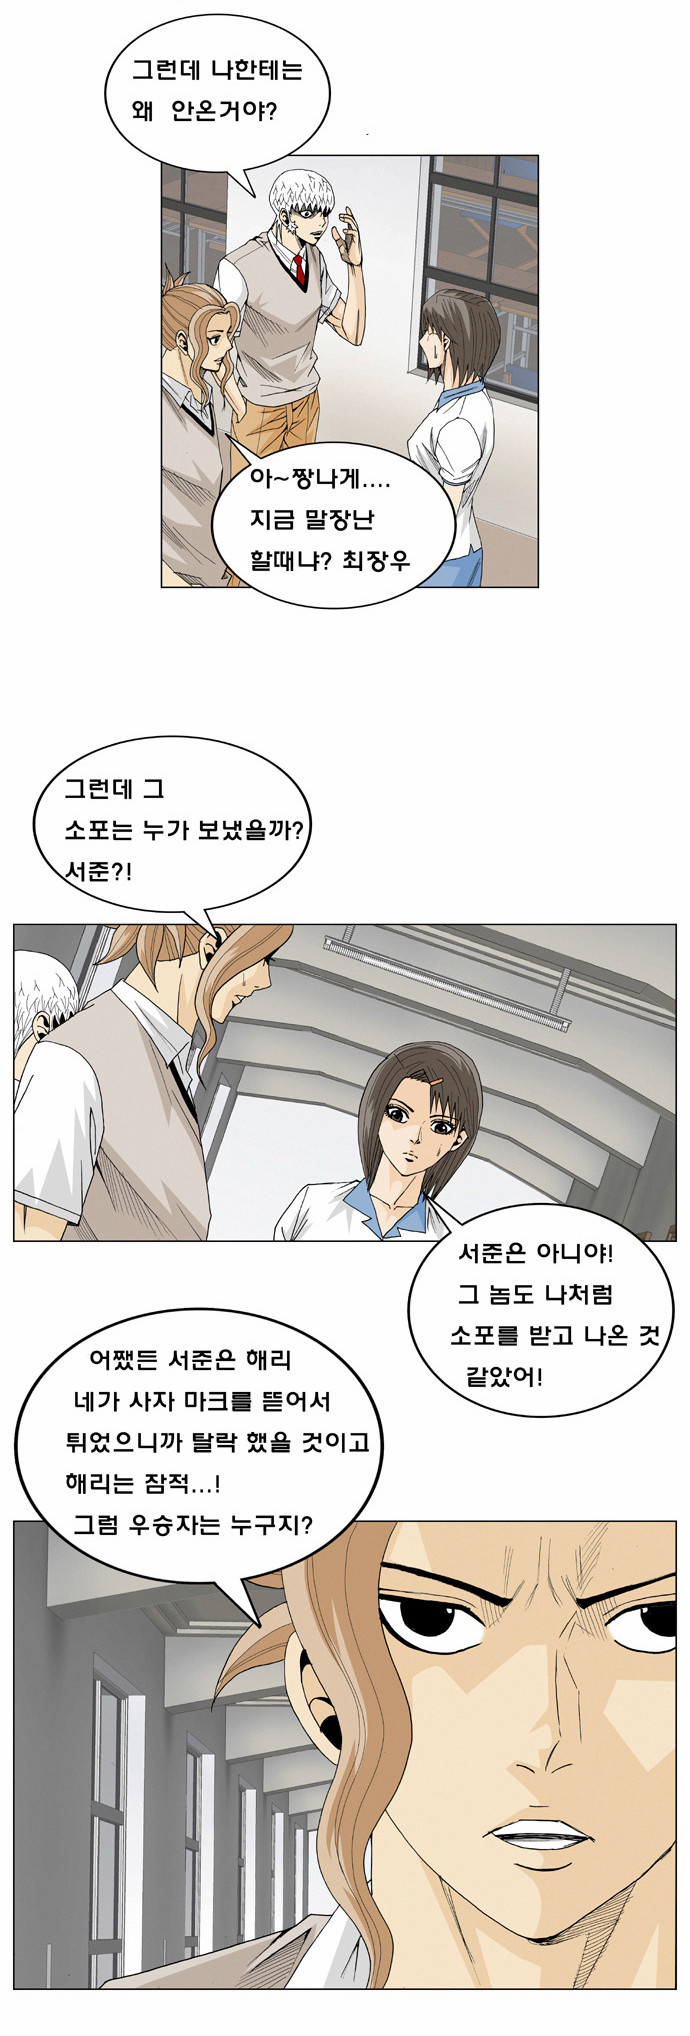 Ultimate Legend - Kang Hae Hyo - Chapter 17 - Page 3